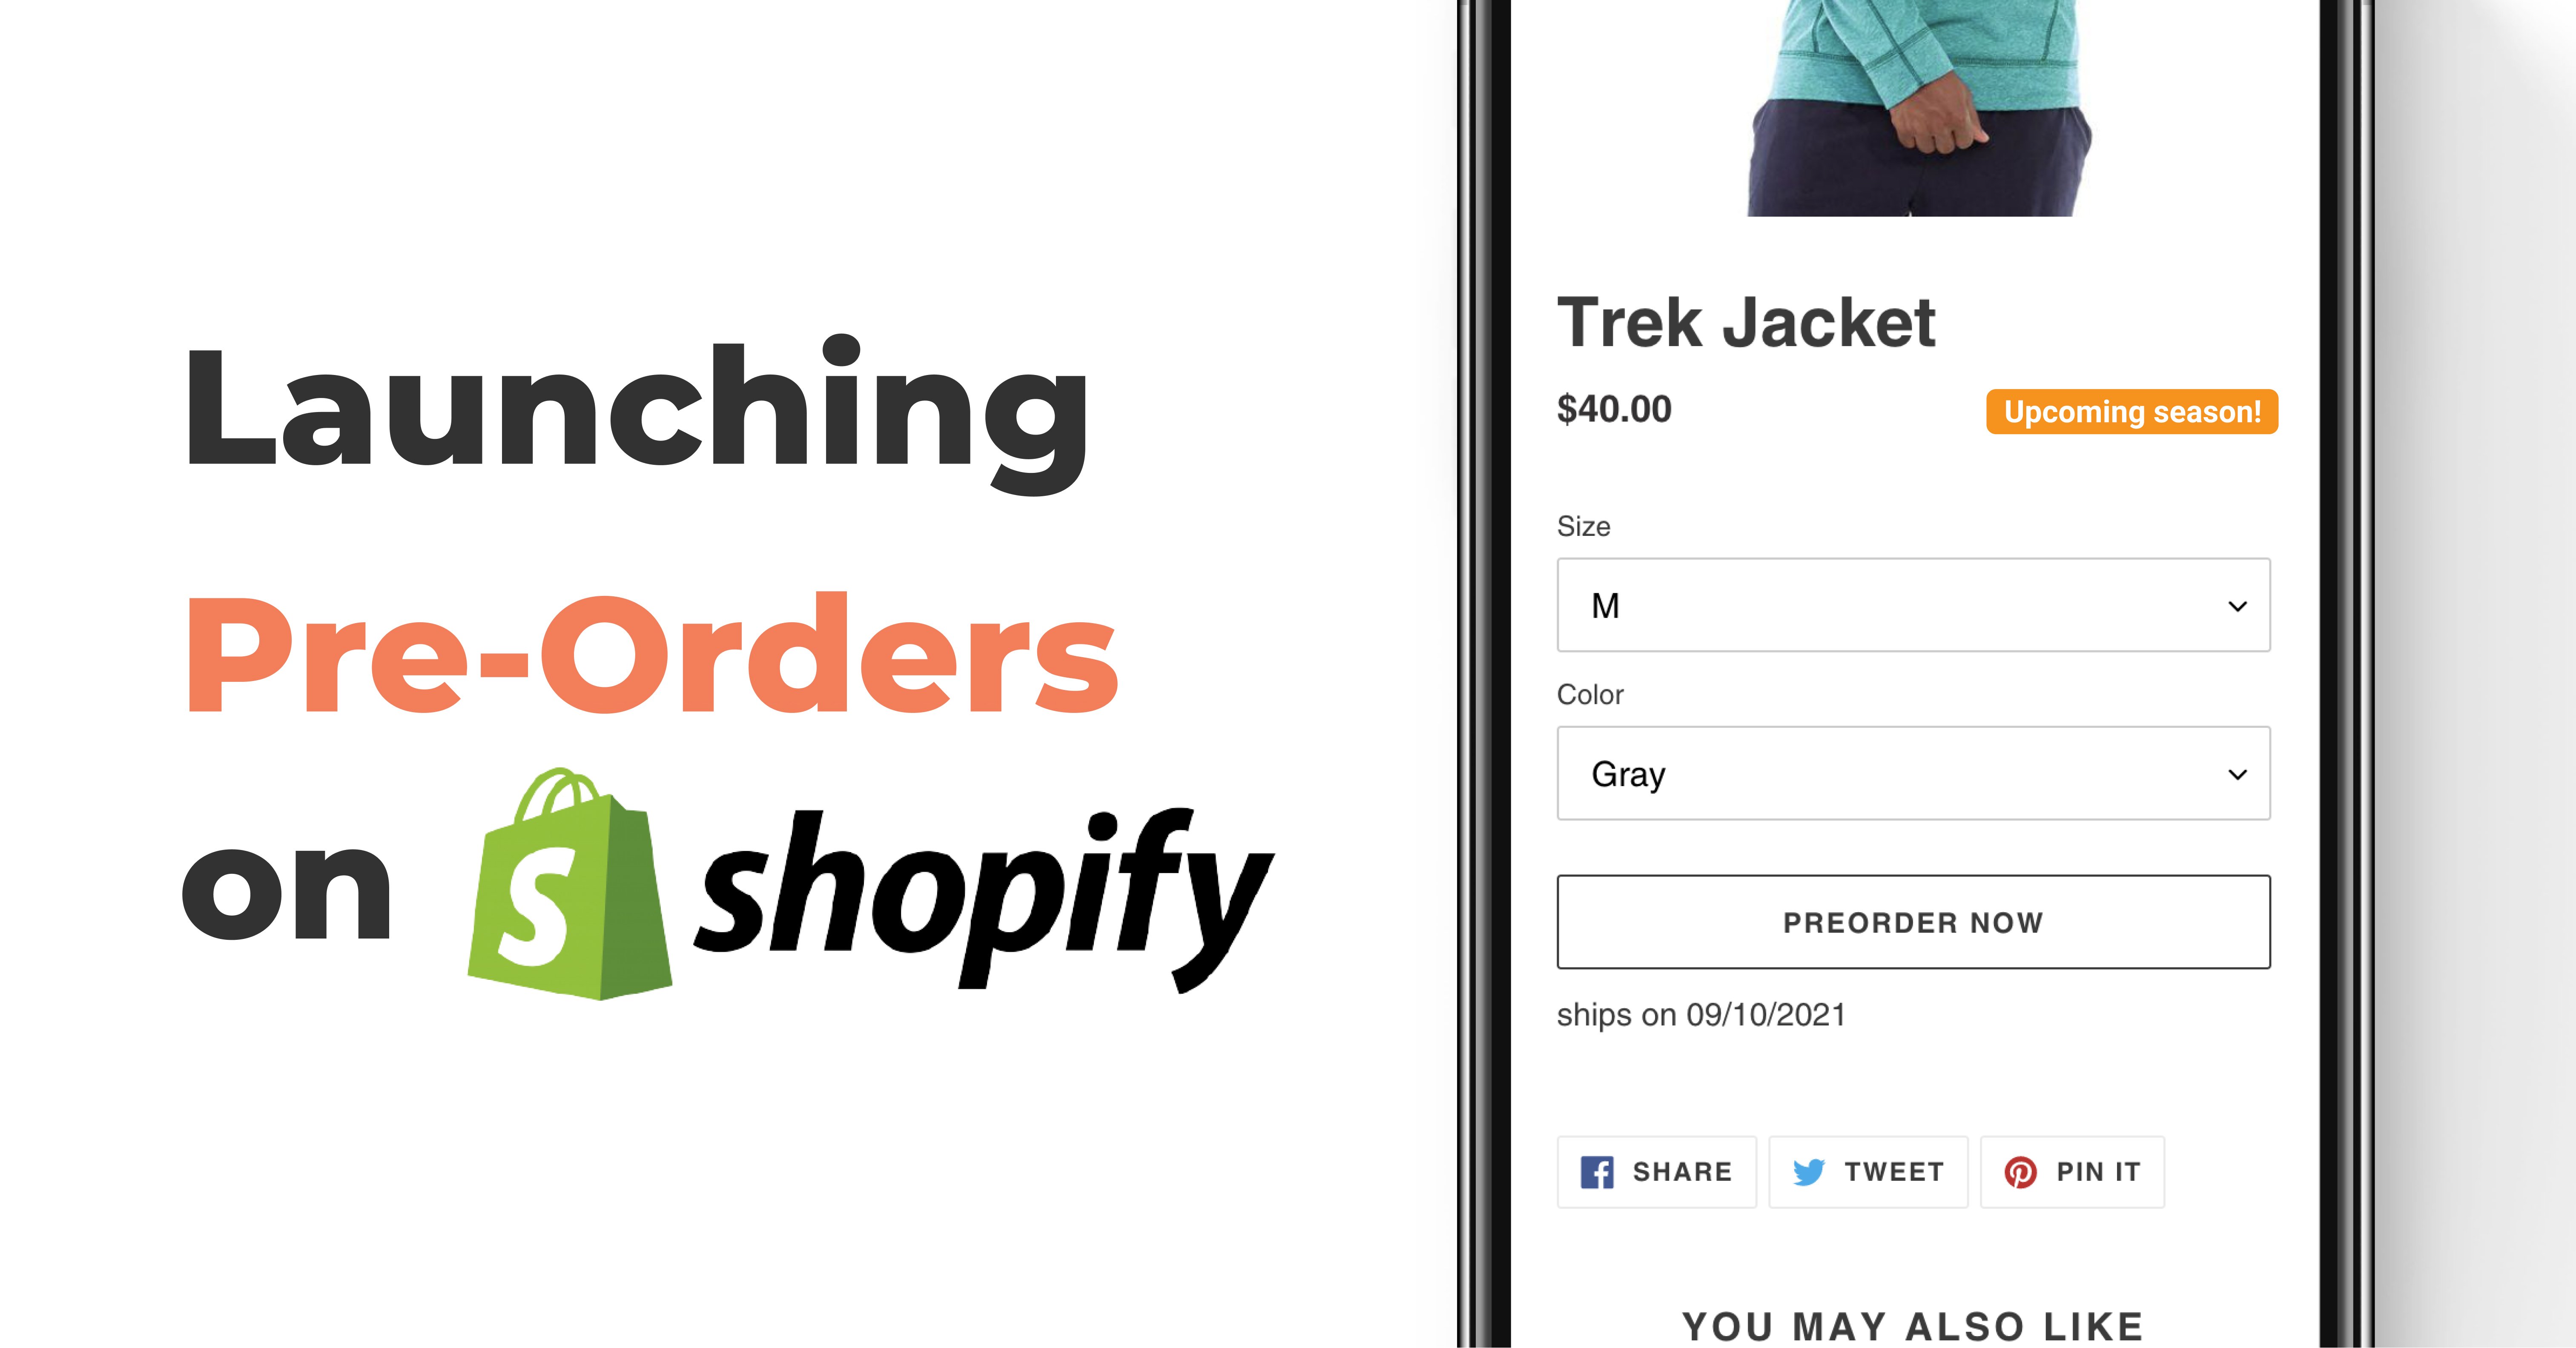 4 Things To Consider Before Launching Pre-Orders on Shopify